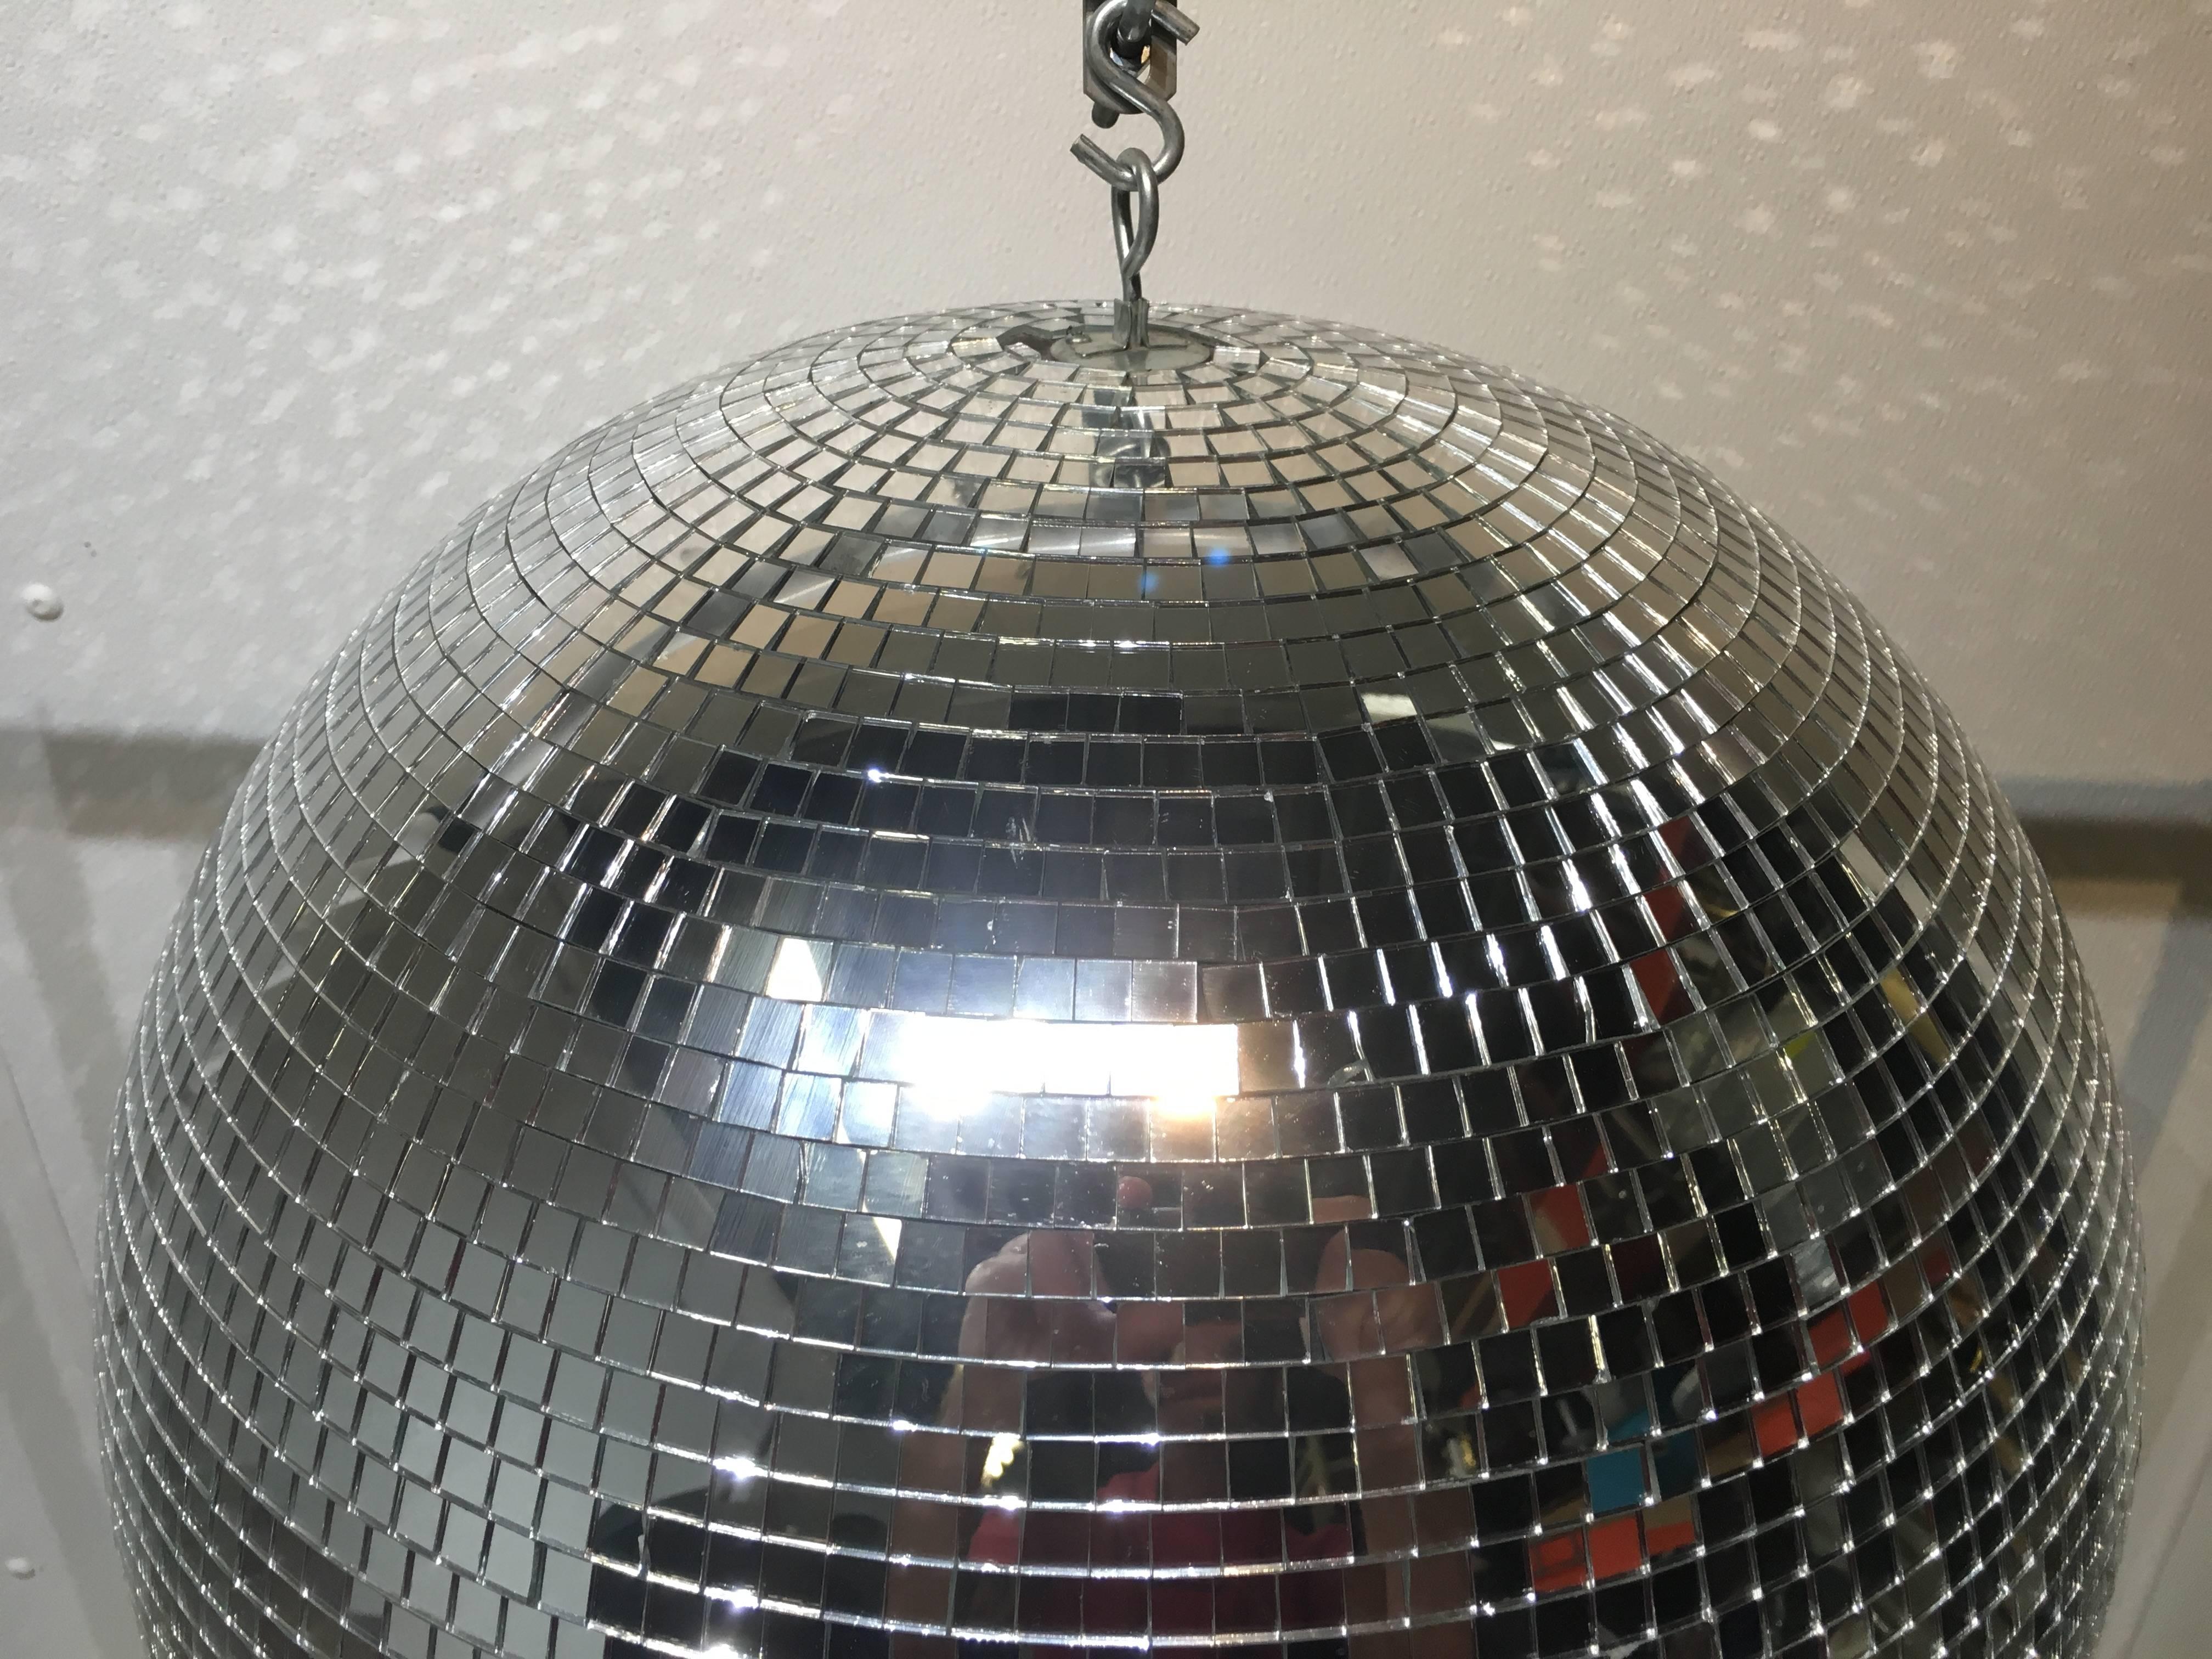 Vintage 1970s disco ball. Excellent vintage condition. Projects amazing facets from mirrored pieces and a great large size.